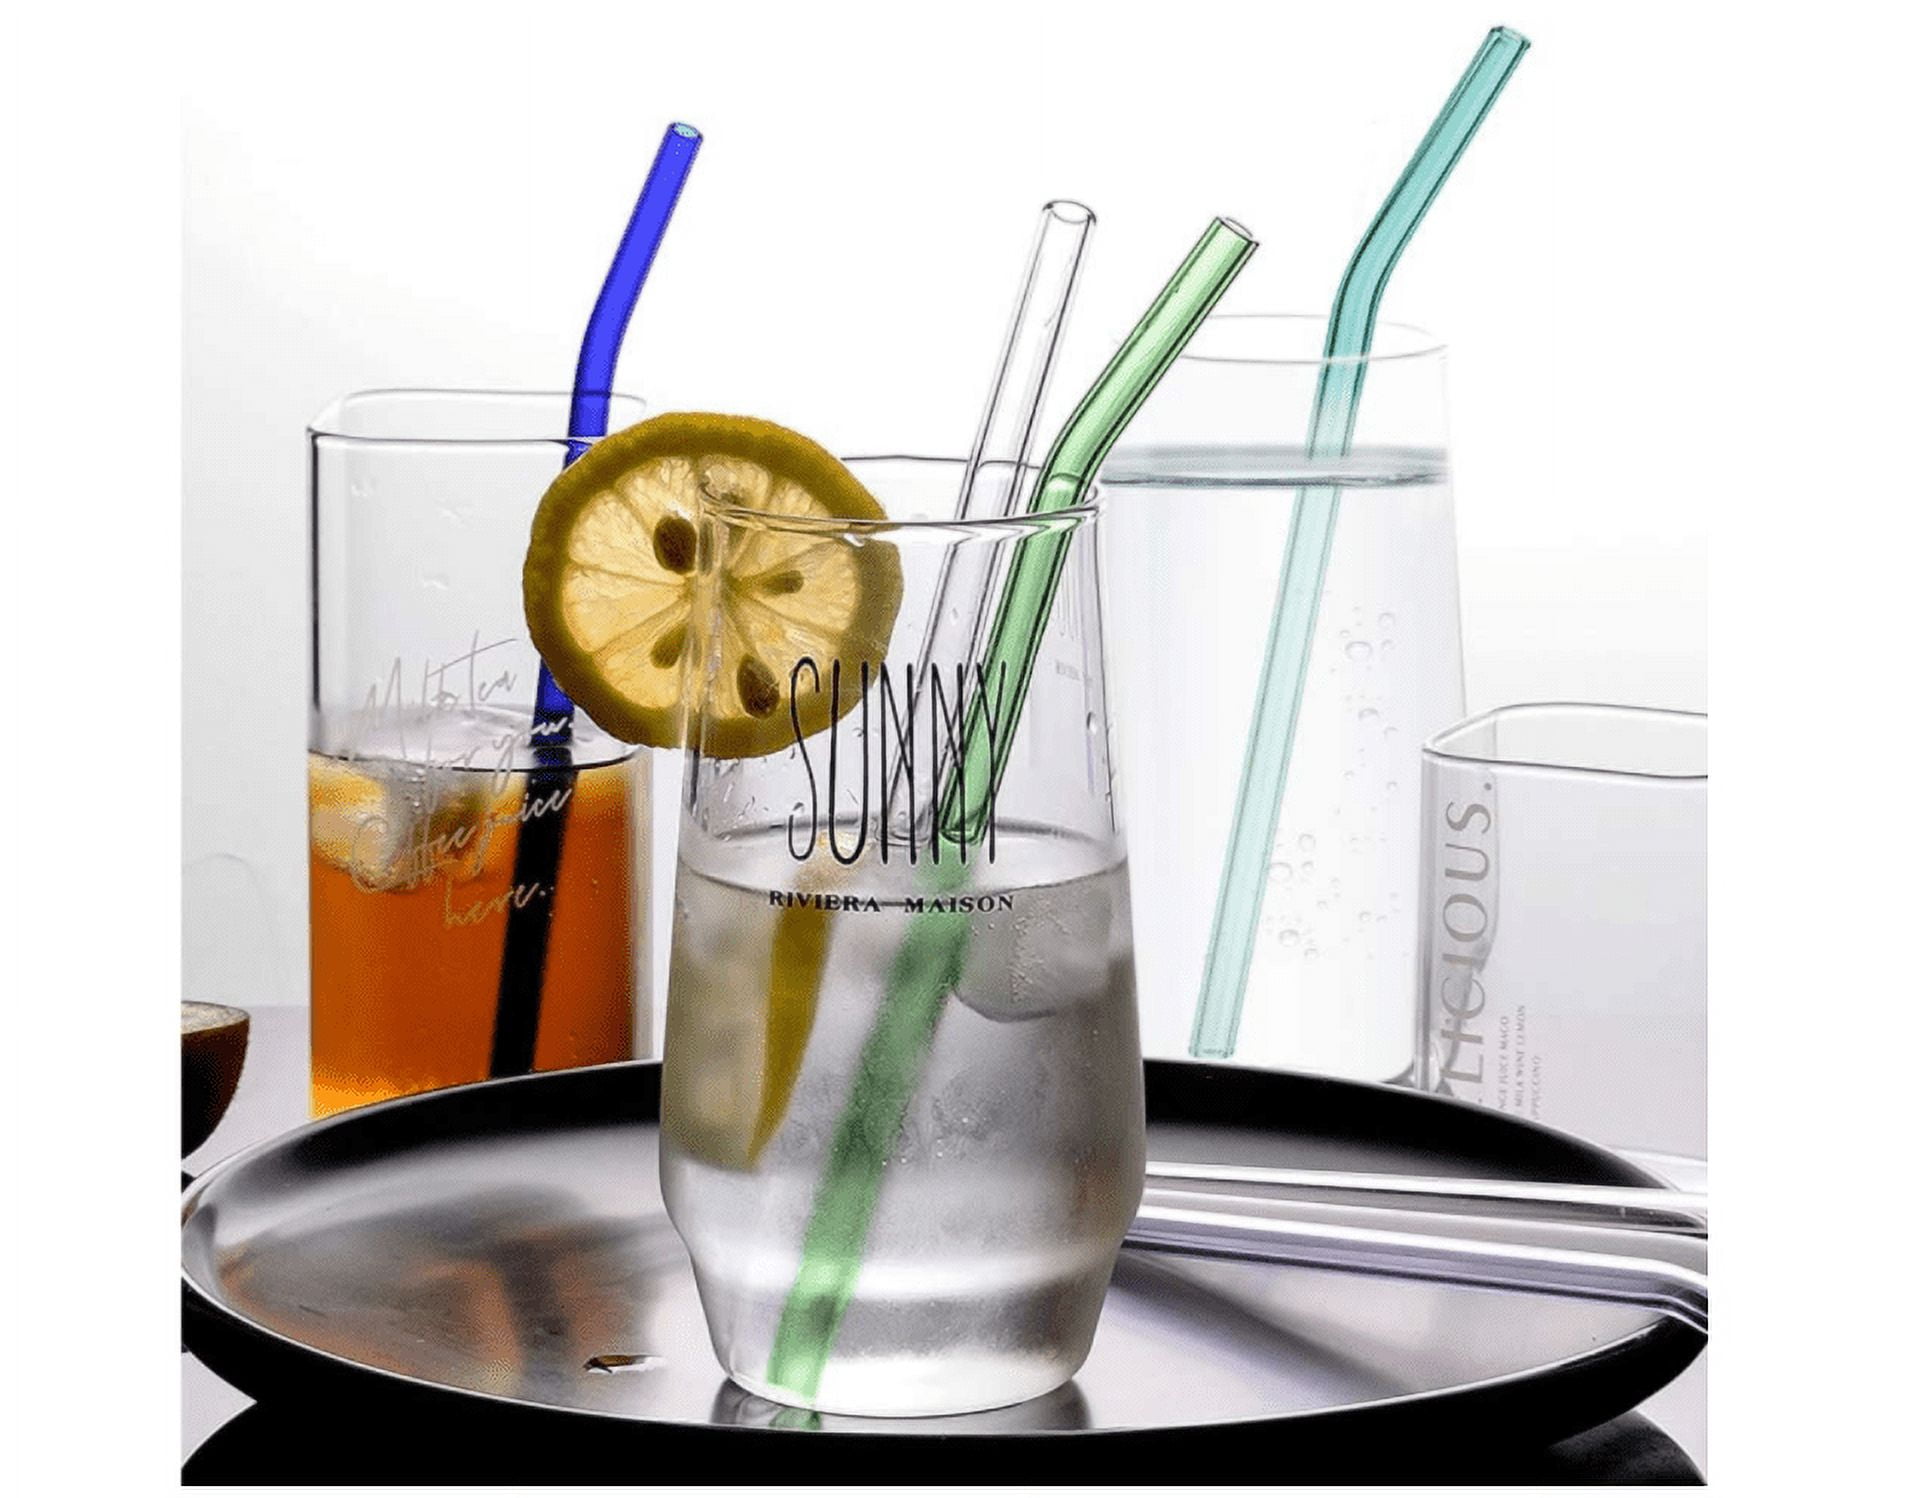 Glass Straws- Topboutique Clear Reusable Glass Straw- Durable Glass Straws Drinking for Smoothie Cocktail ,Color Changing Cups (Pa, Size: 8.70 x 2.50